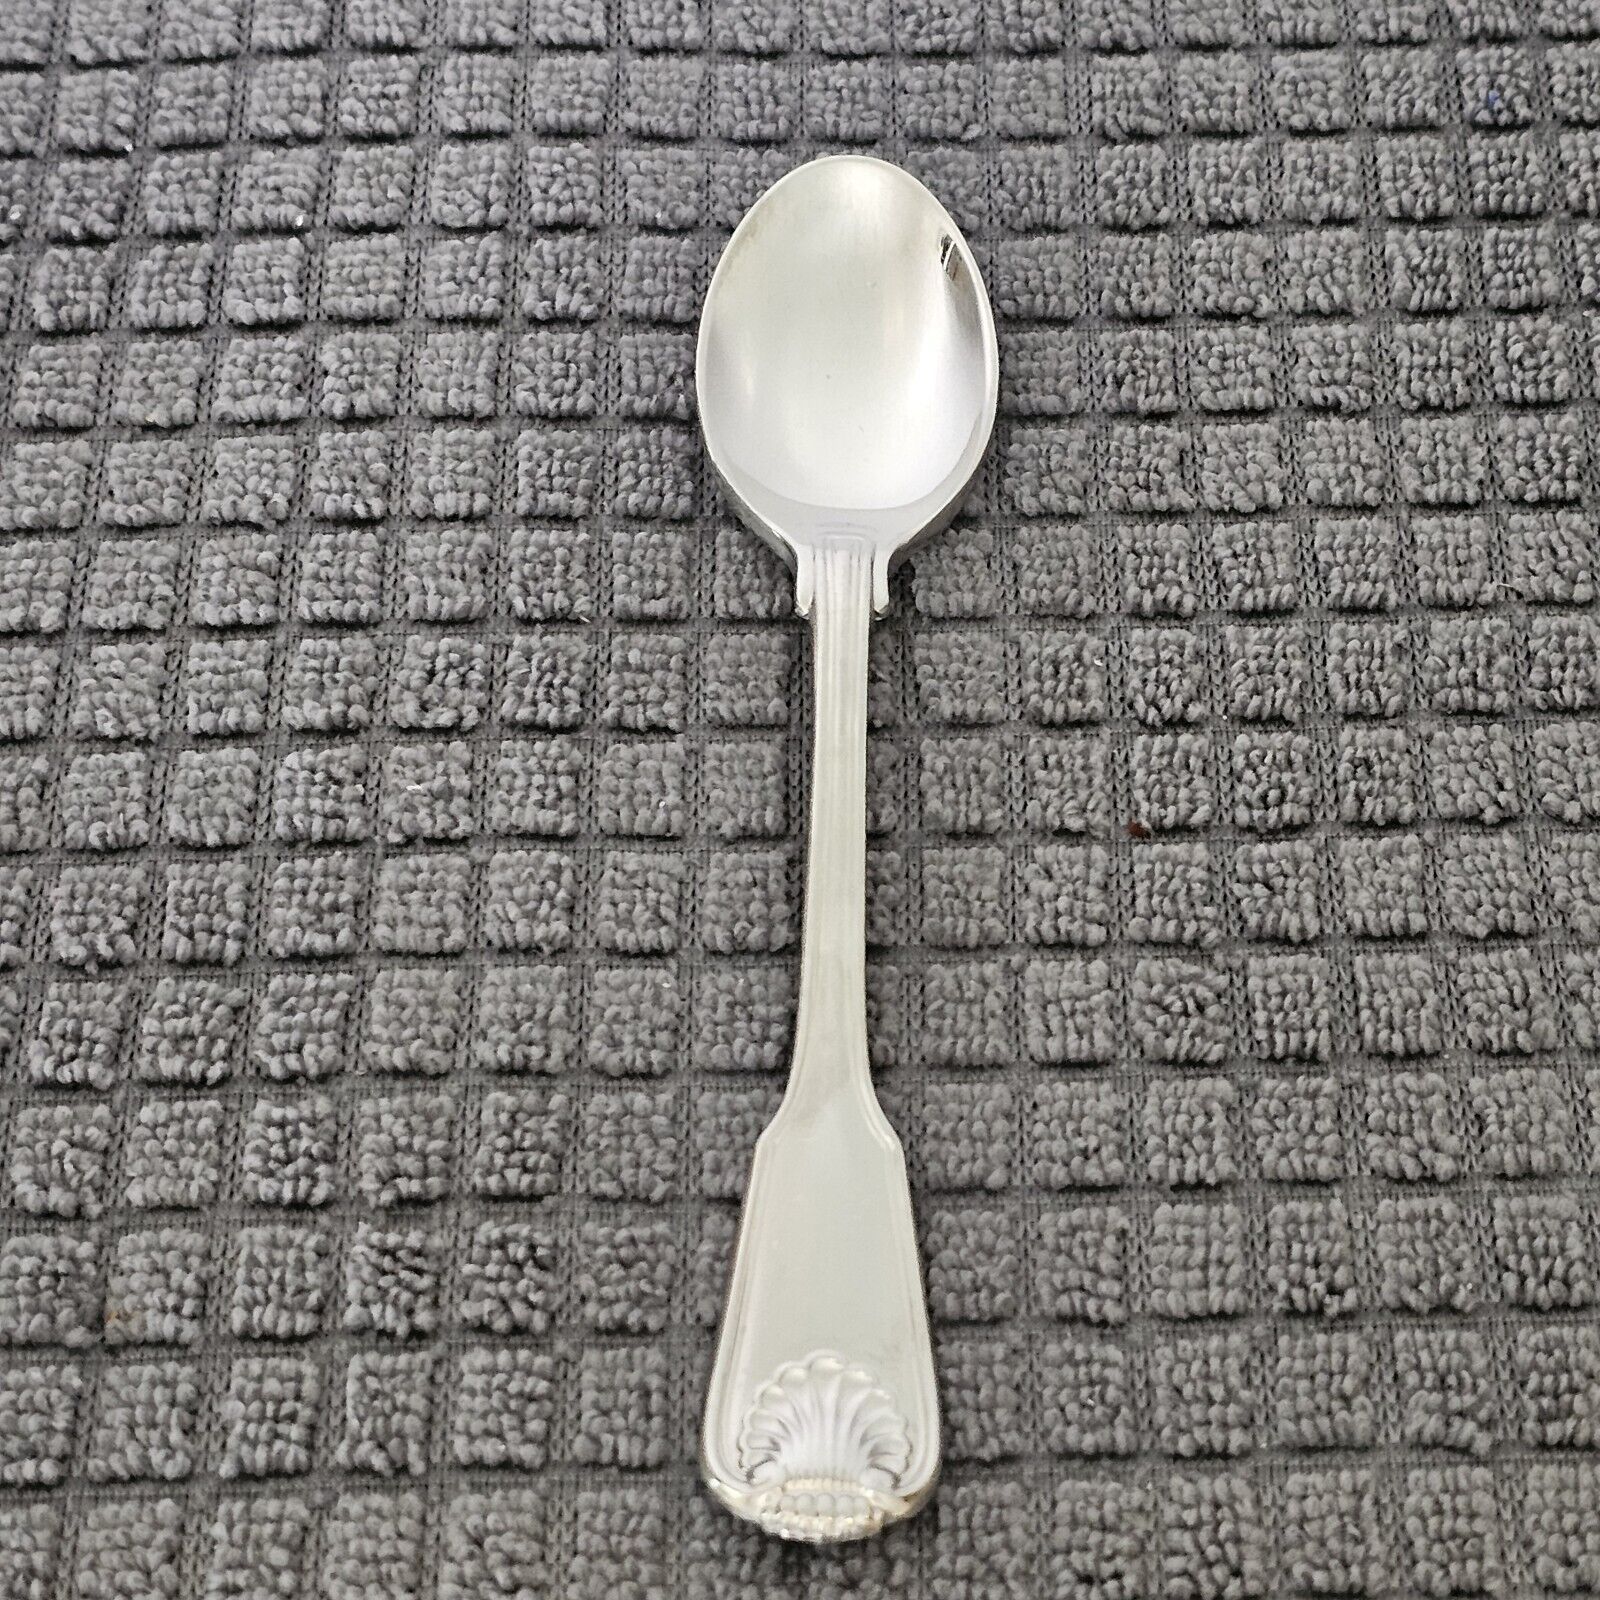 Towle London Shell Teaspoon GERMANY Stainless Flatware